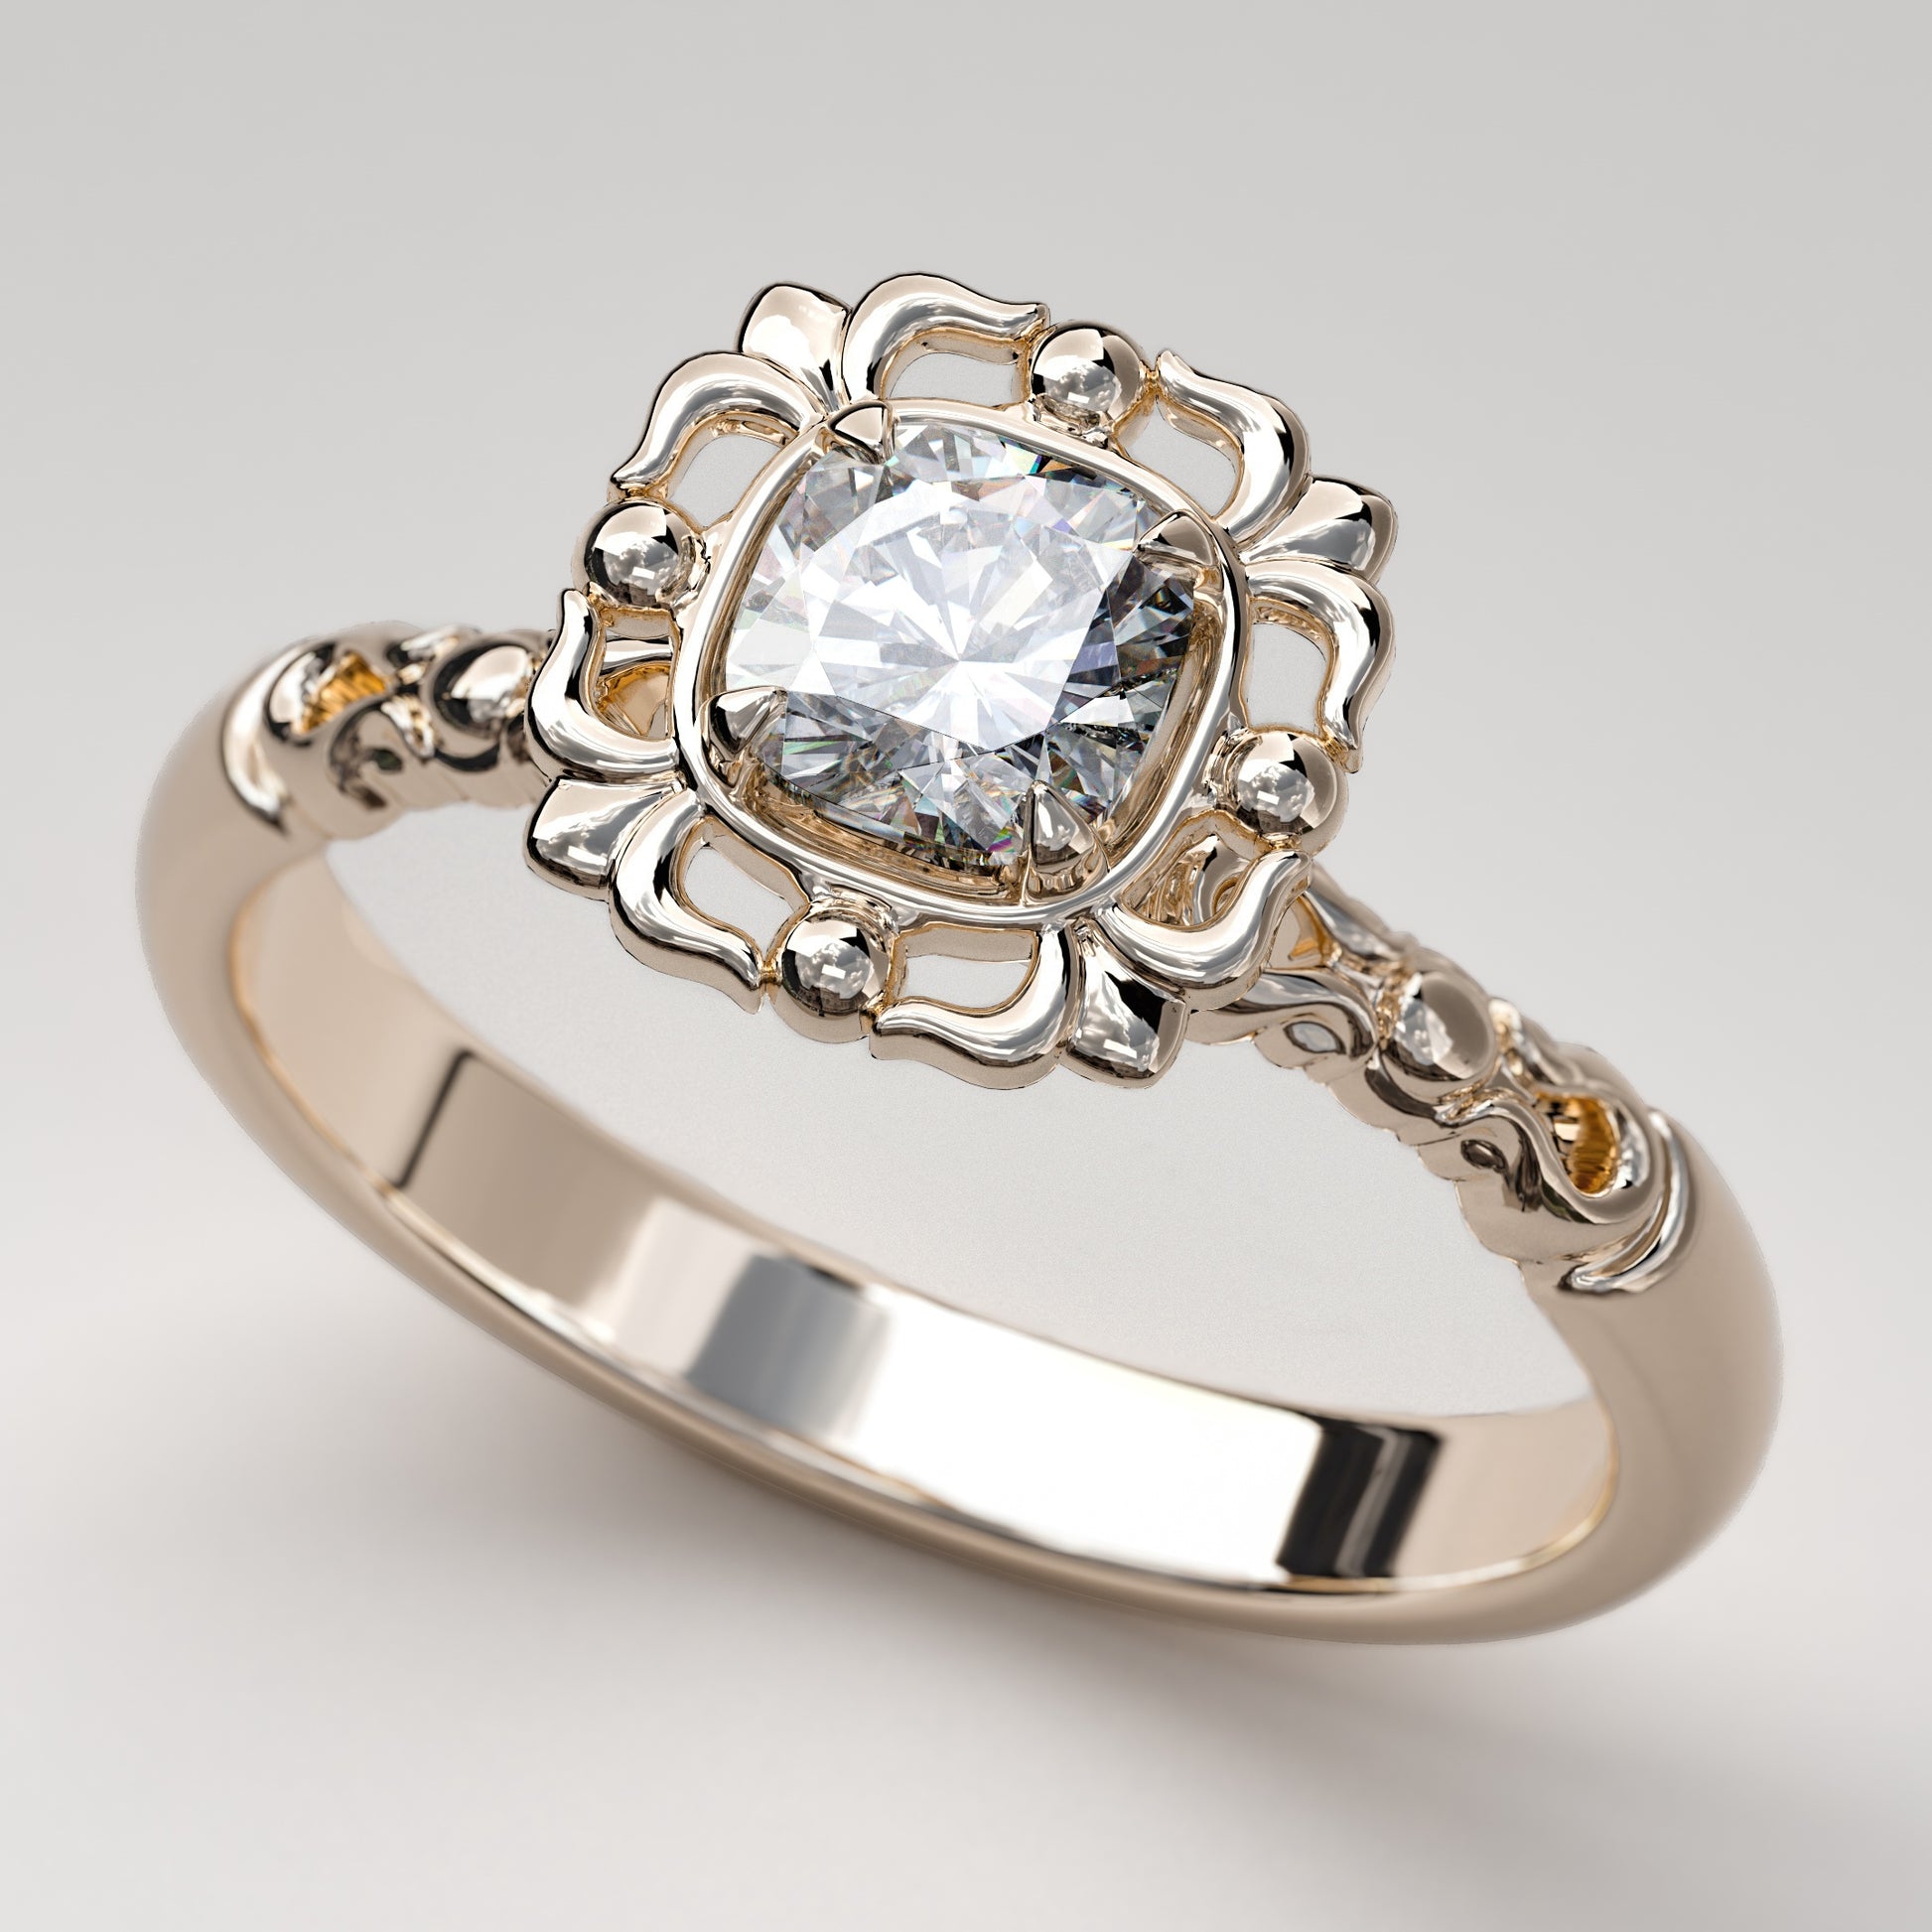 Filigree halo engagement ring with cushion cut Neo Prime Moissanite Gemstone in rose gold